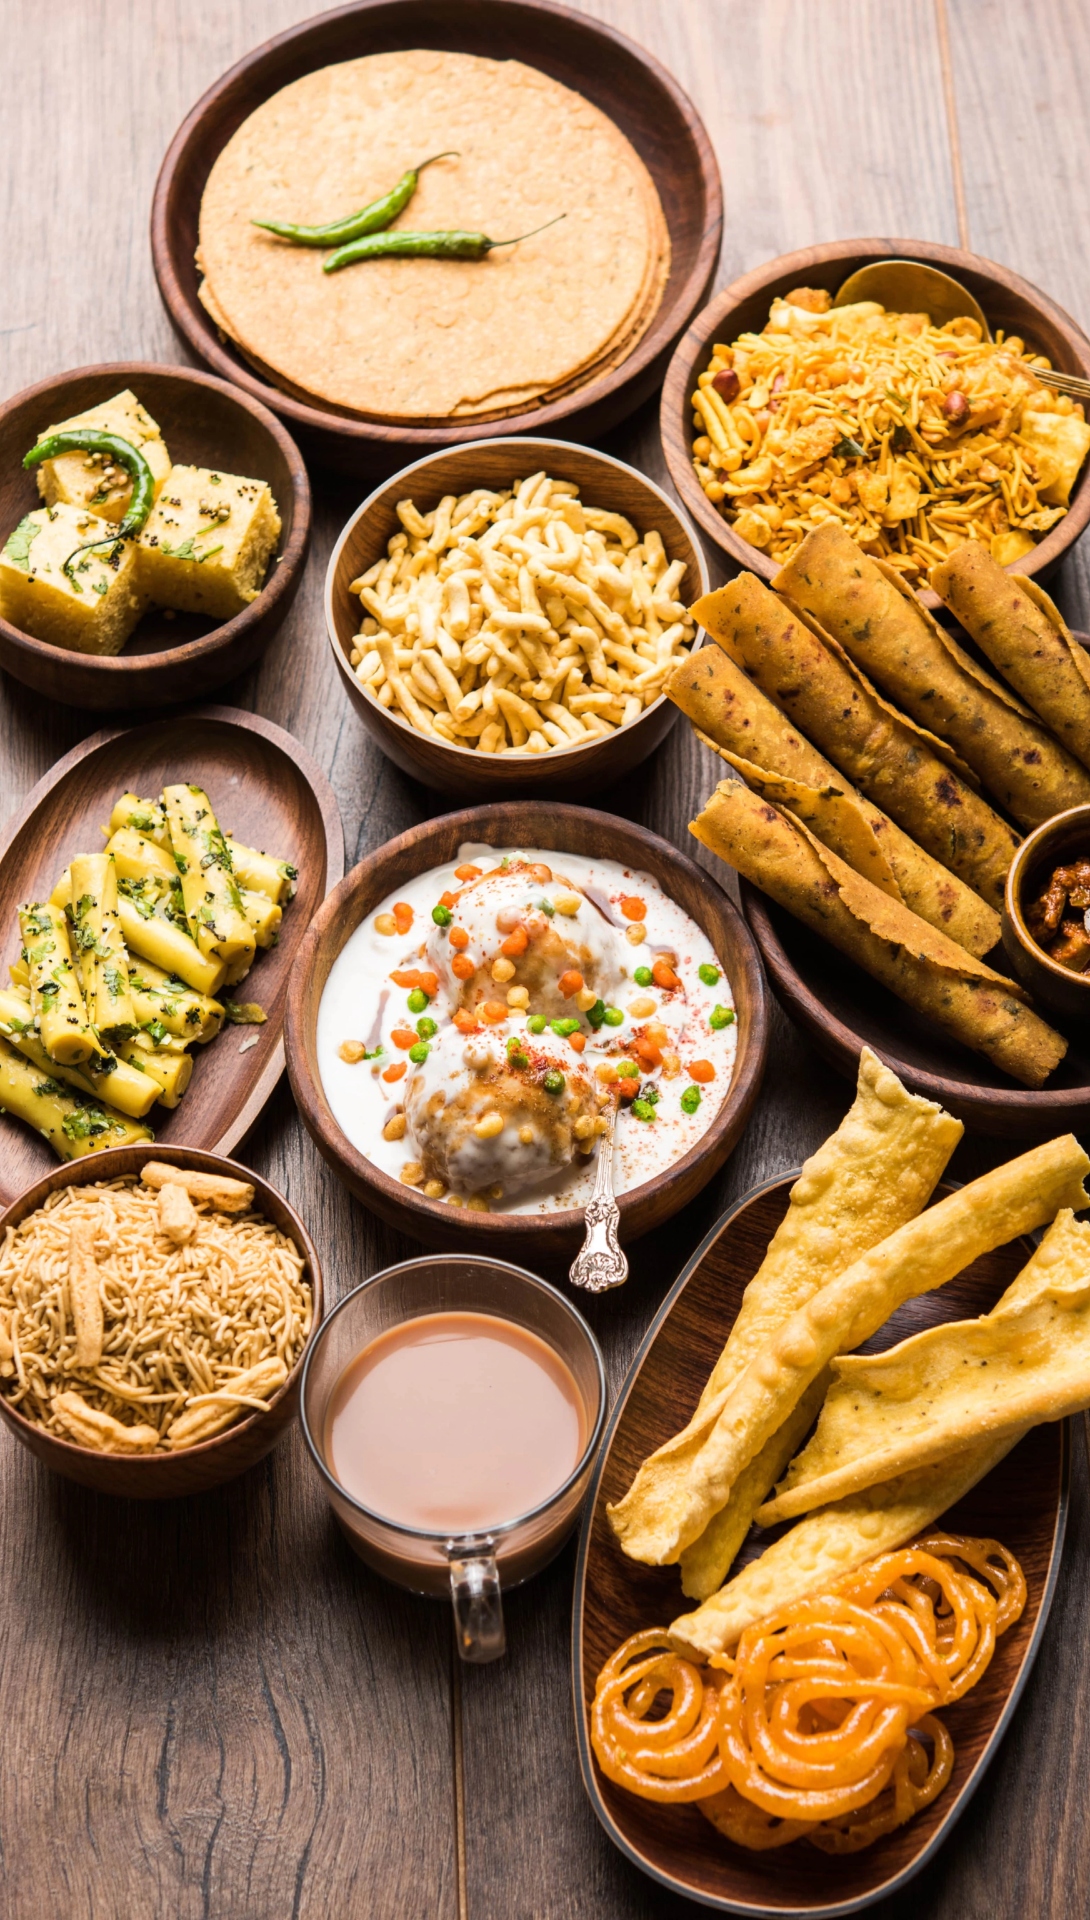 Popular Gujarati breakfast dishes you must try